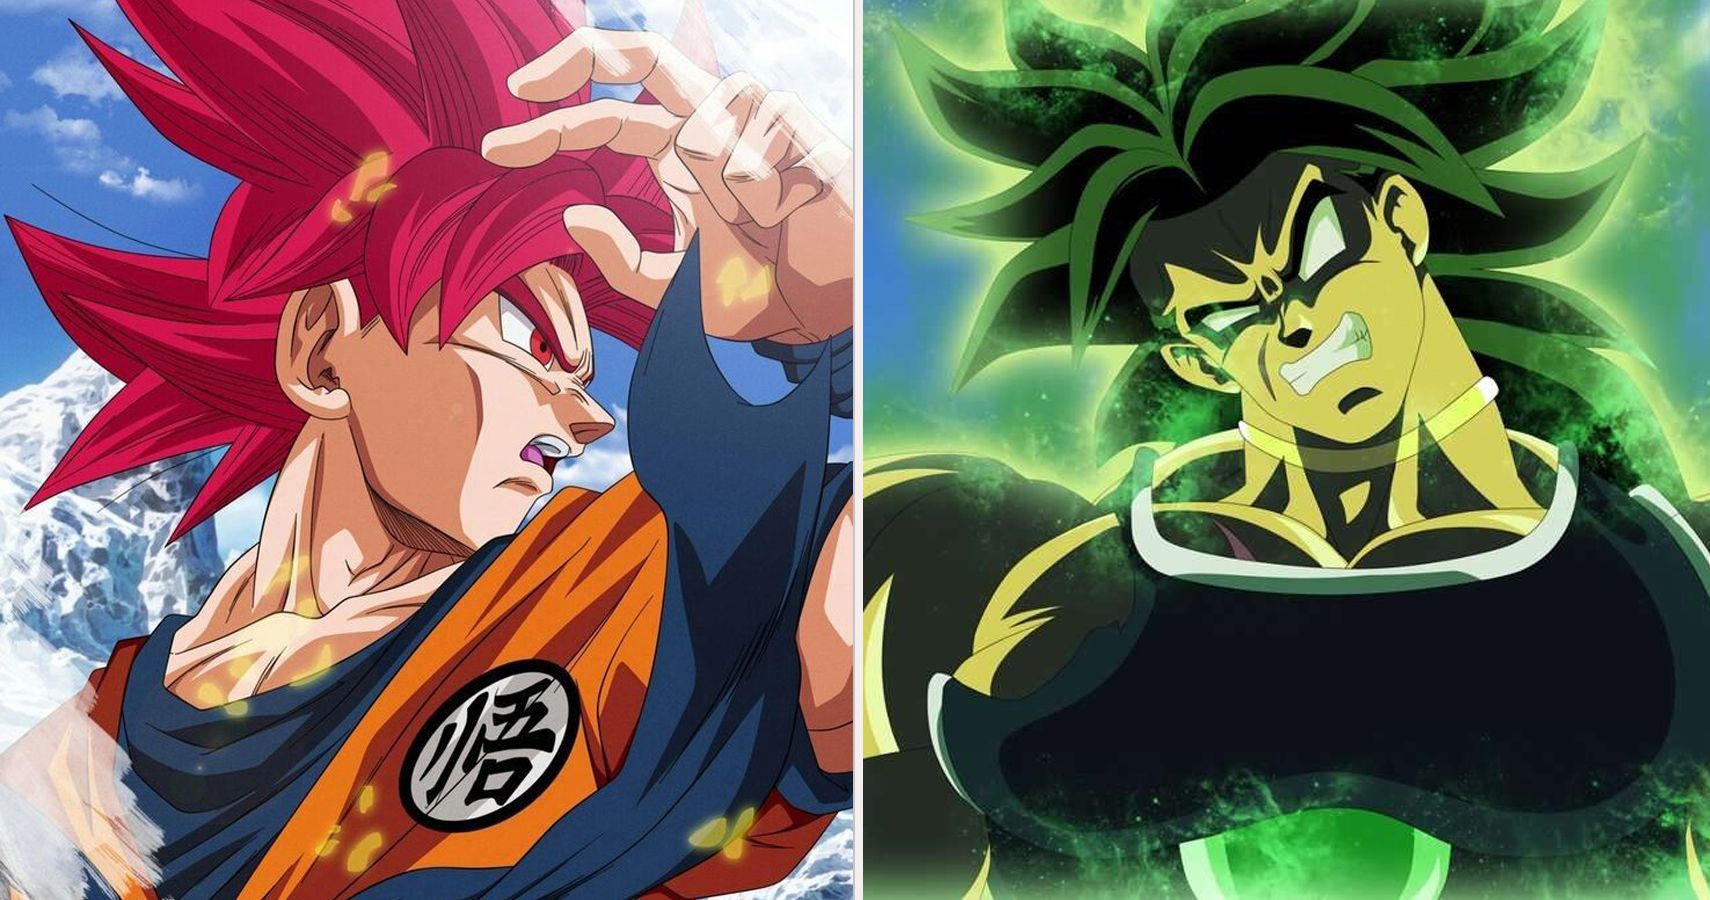 25 Hidden Details In Dragon Ball Super: Broly That Fans Missed